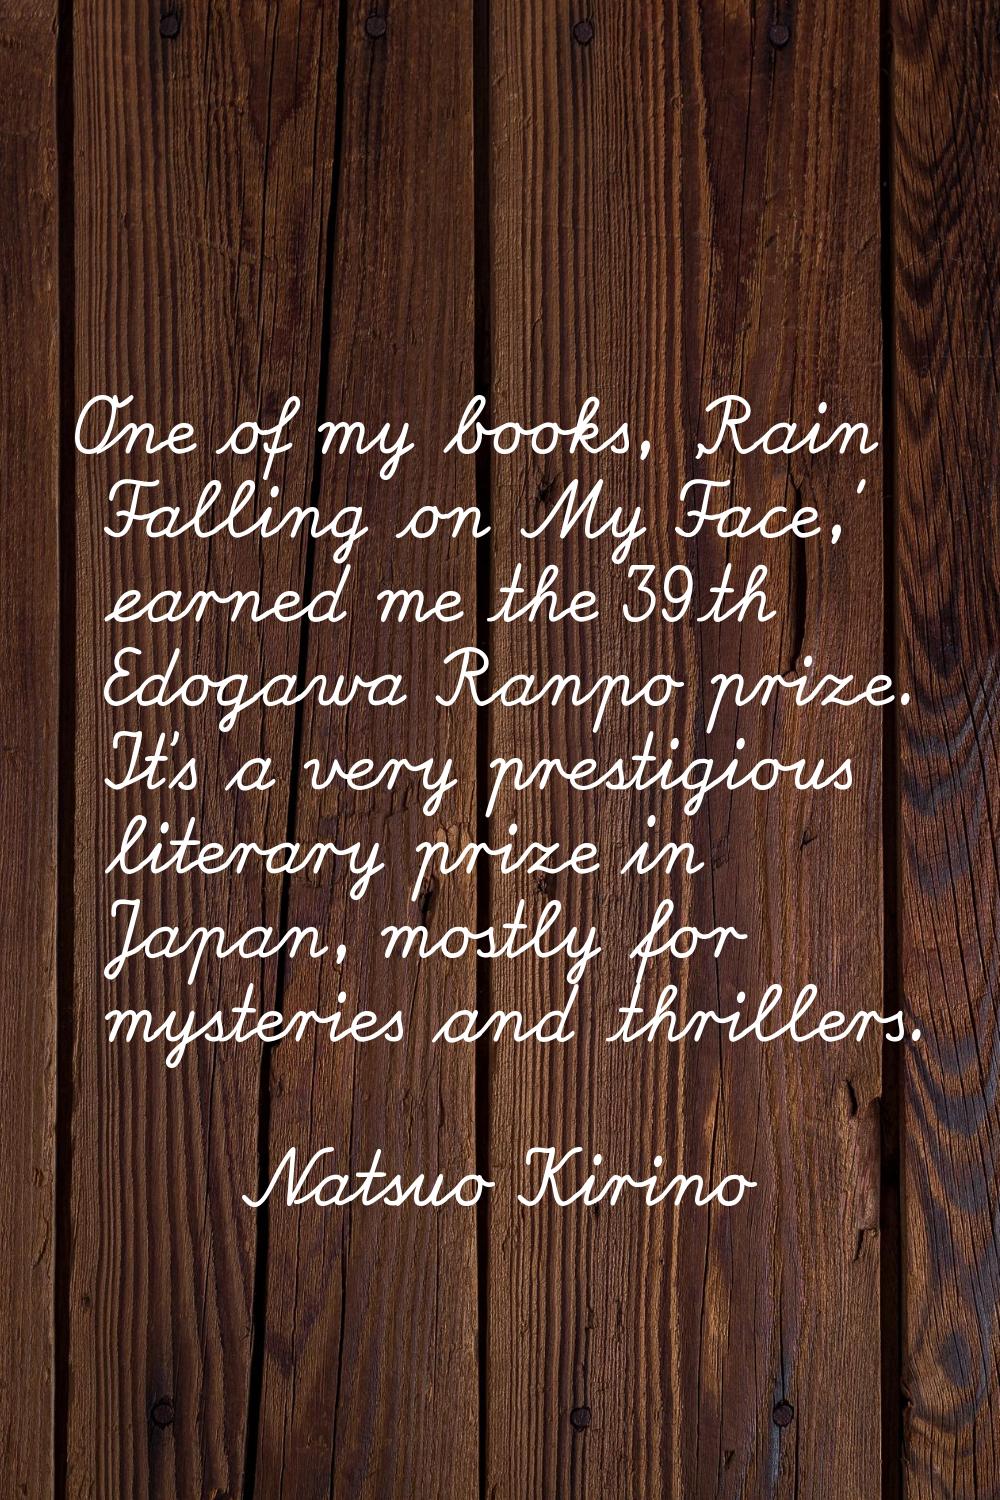 One of my books, 'Rain Falling on My Face,' earned me the 39th Edogawa Ranpo prize. It's a very pre